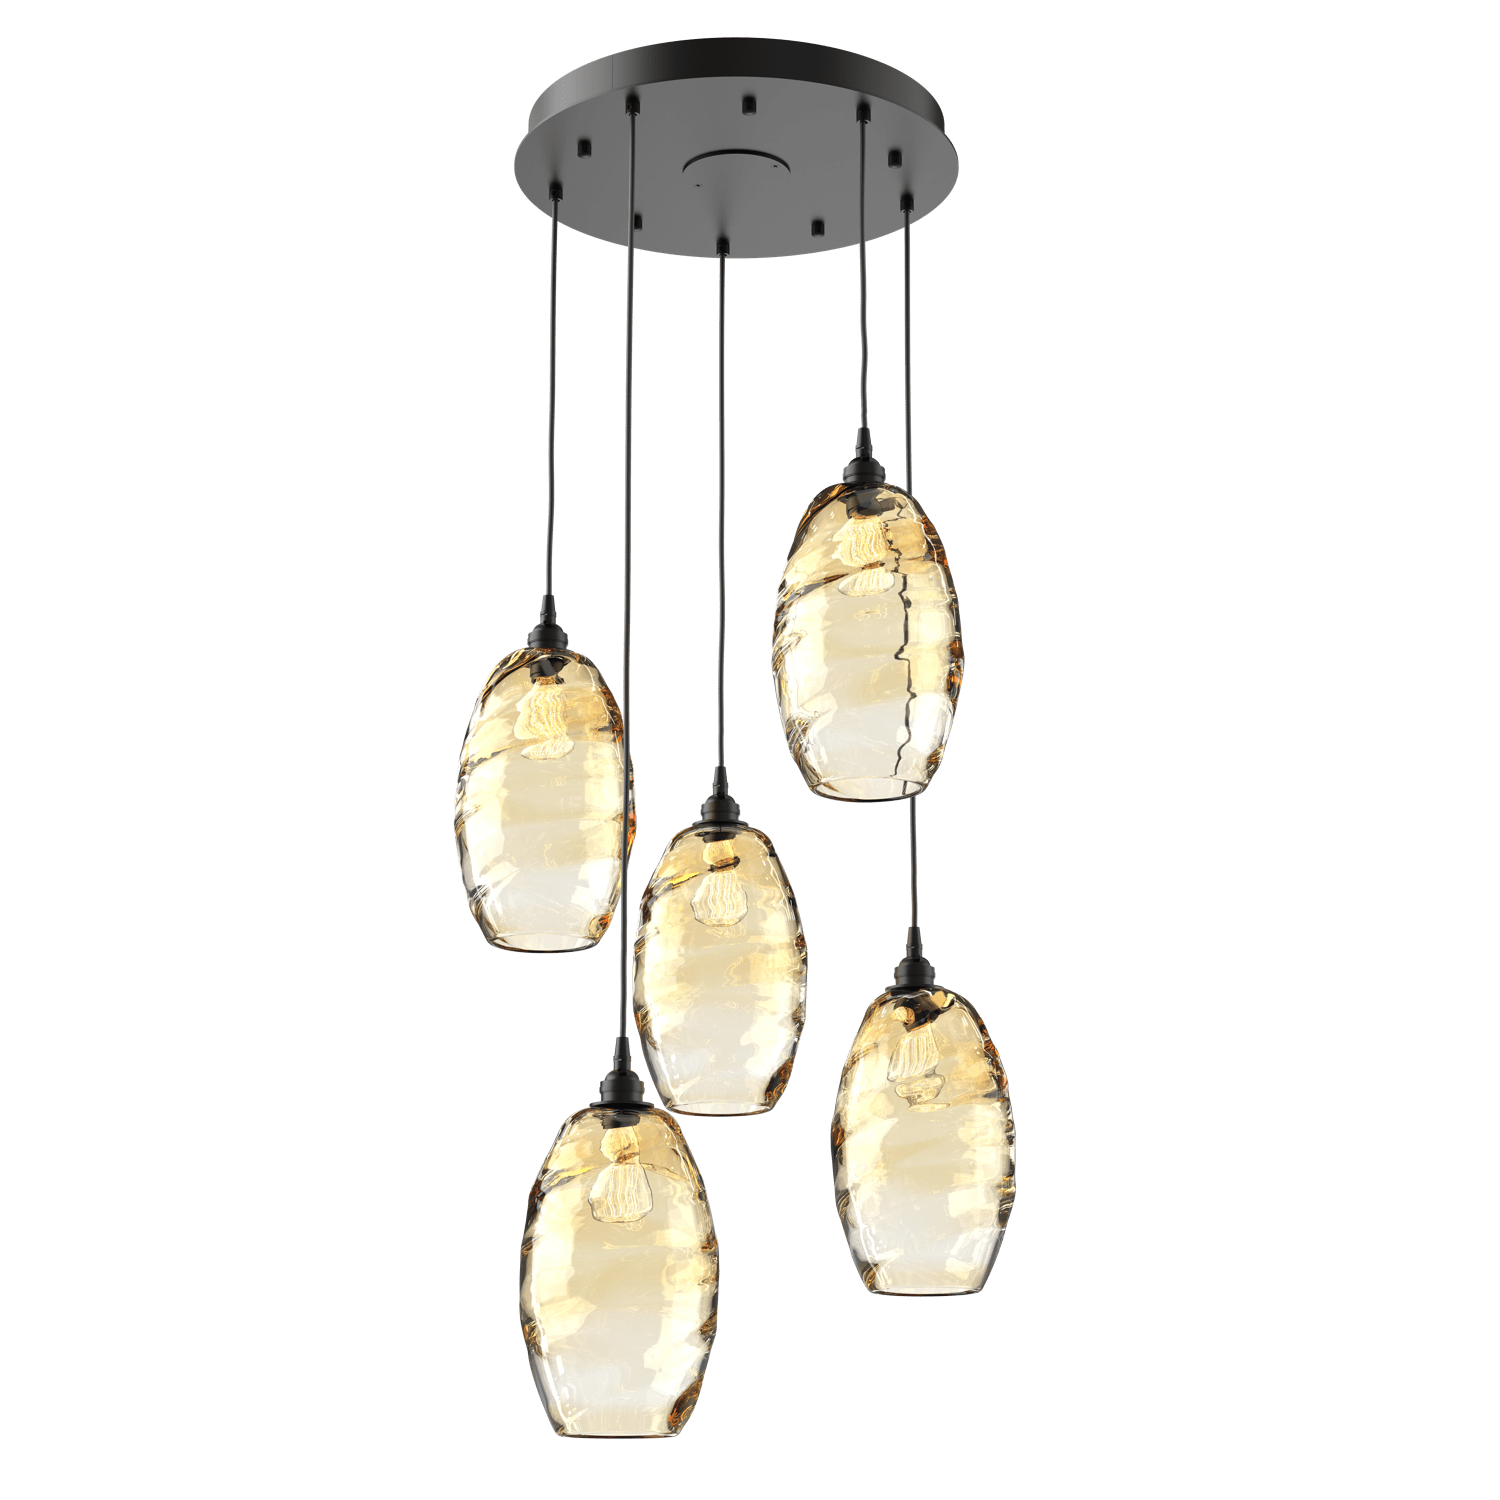 CHB0035-05-MB-OA-Hammerton-Studio-Optic-Blown-Glass-Elisse-5-light-round-pendant-chandelier-with-matte-black-finish-and-optic-amber-blown-glass-shades-and-incandescent-lamping